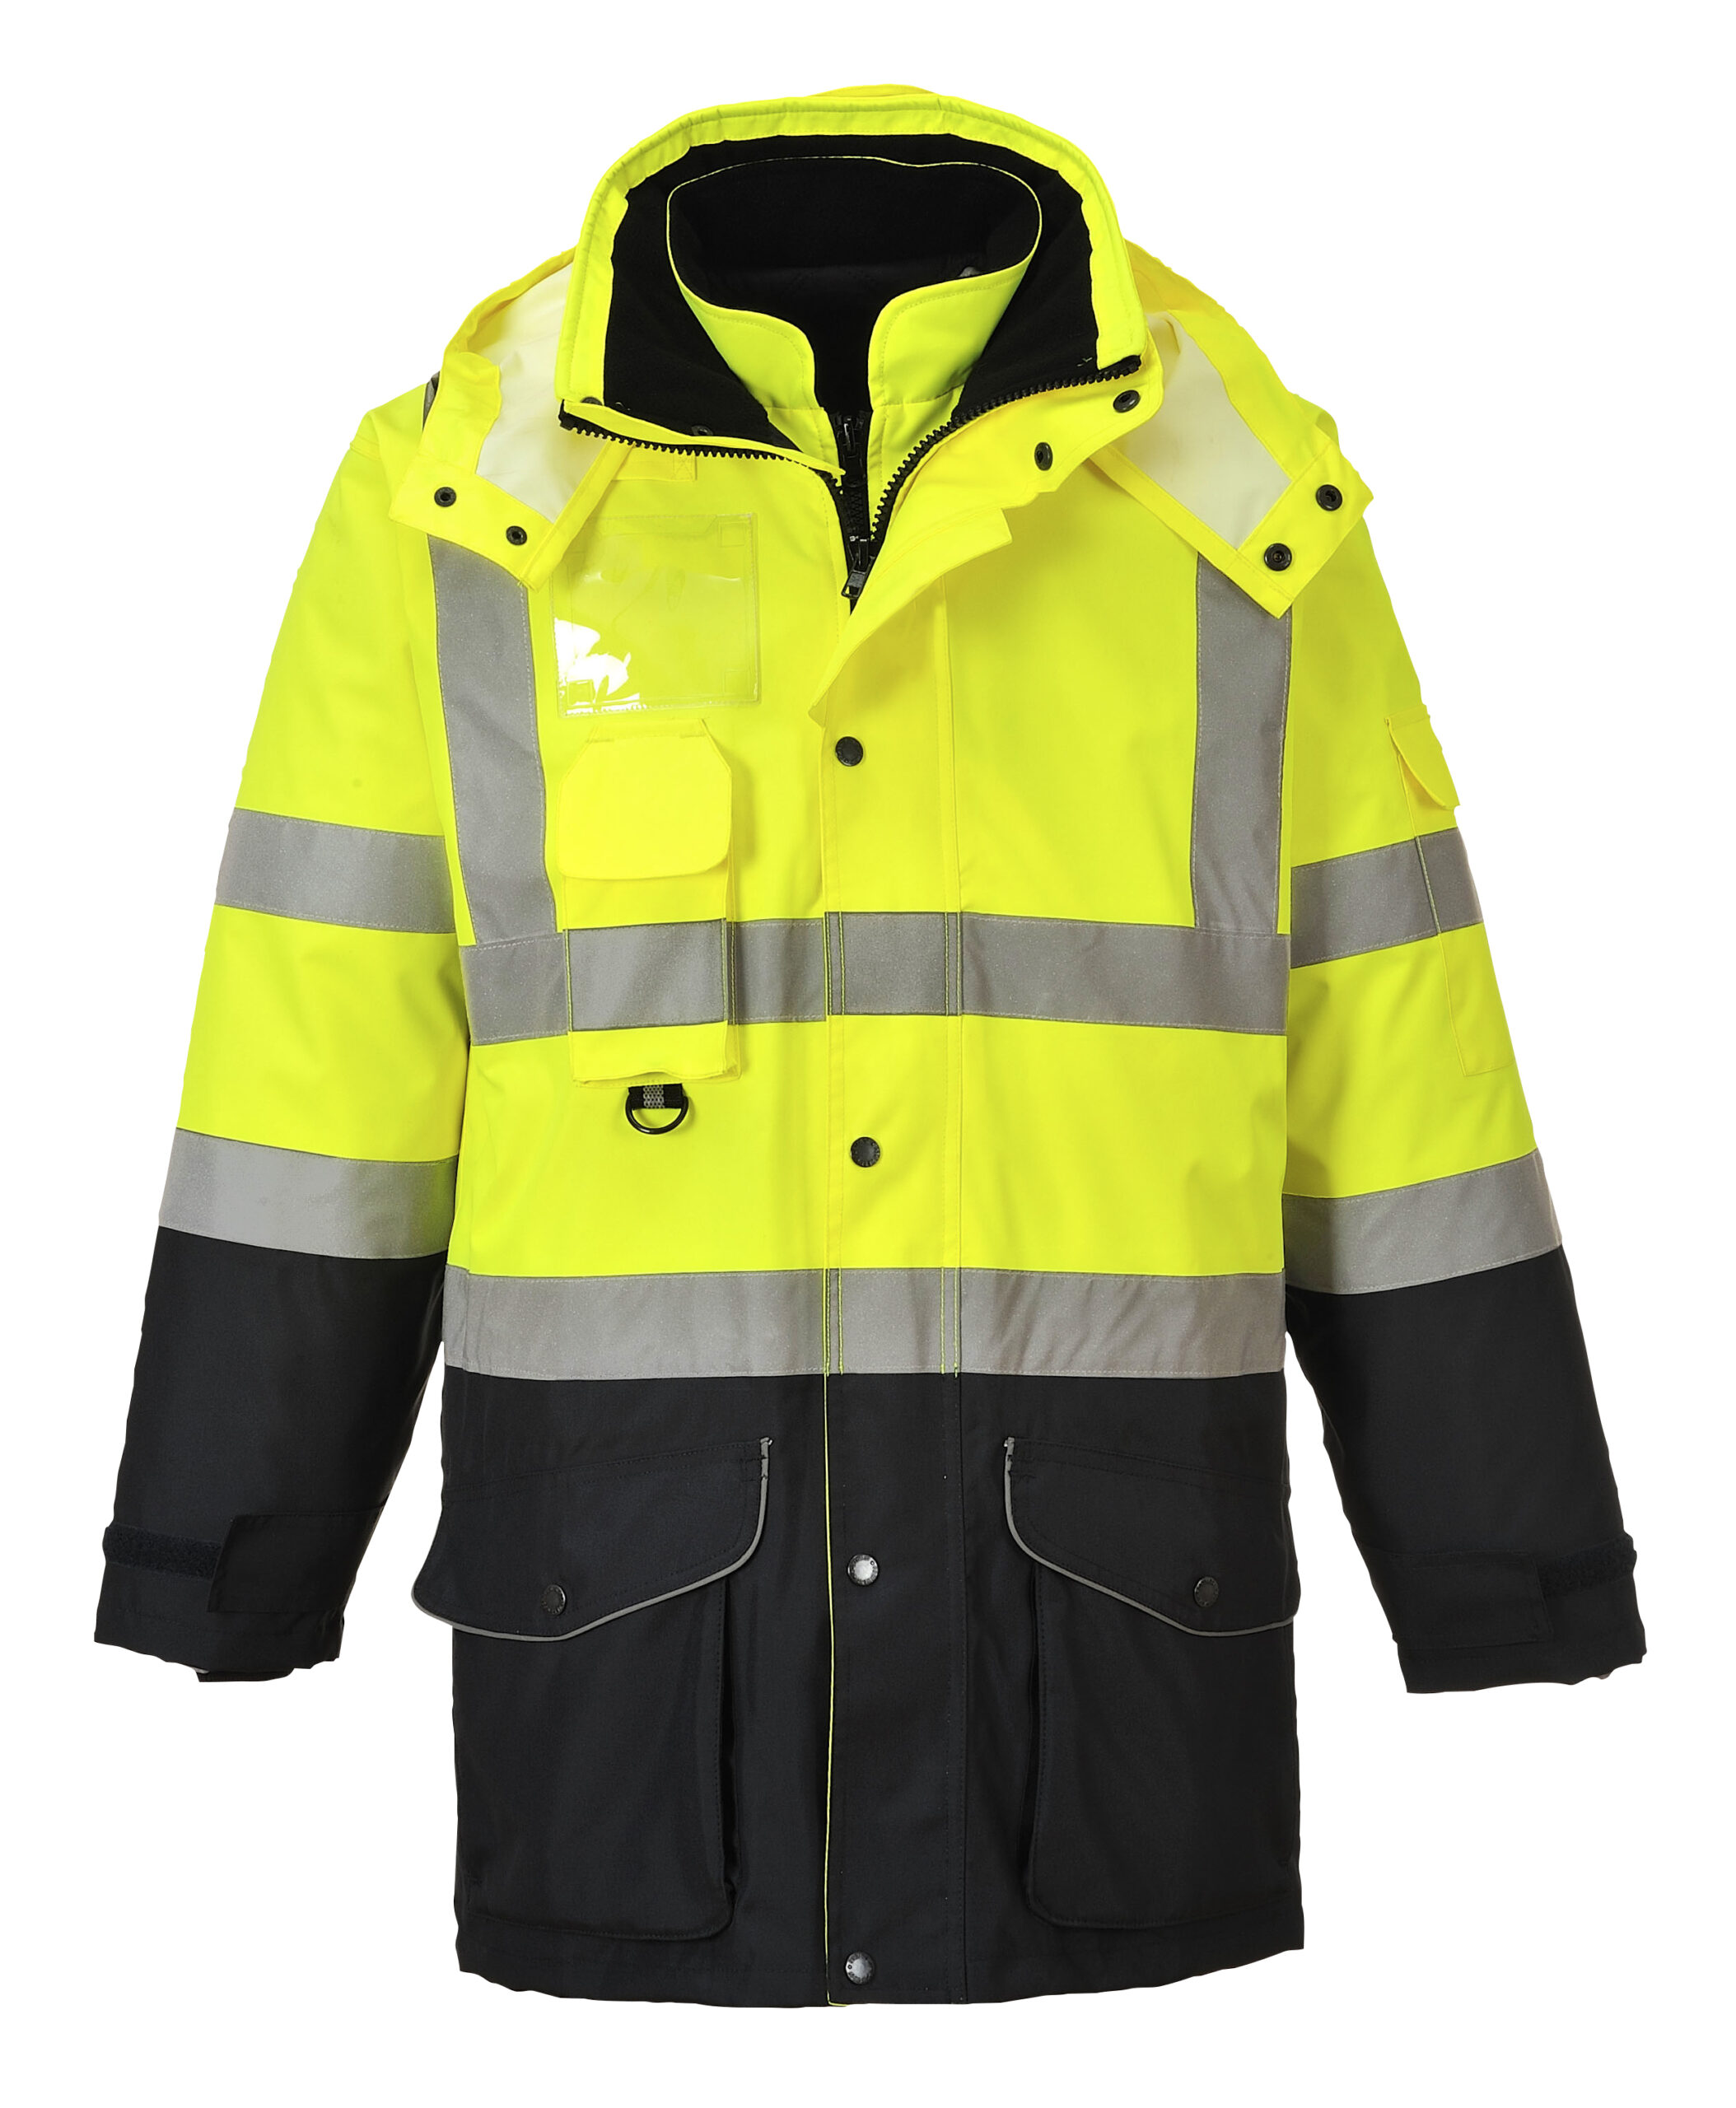 Portwest S426 High Visibility 7-in-1 Contrast Traffic Jacket-0